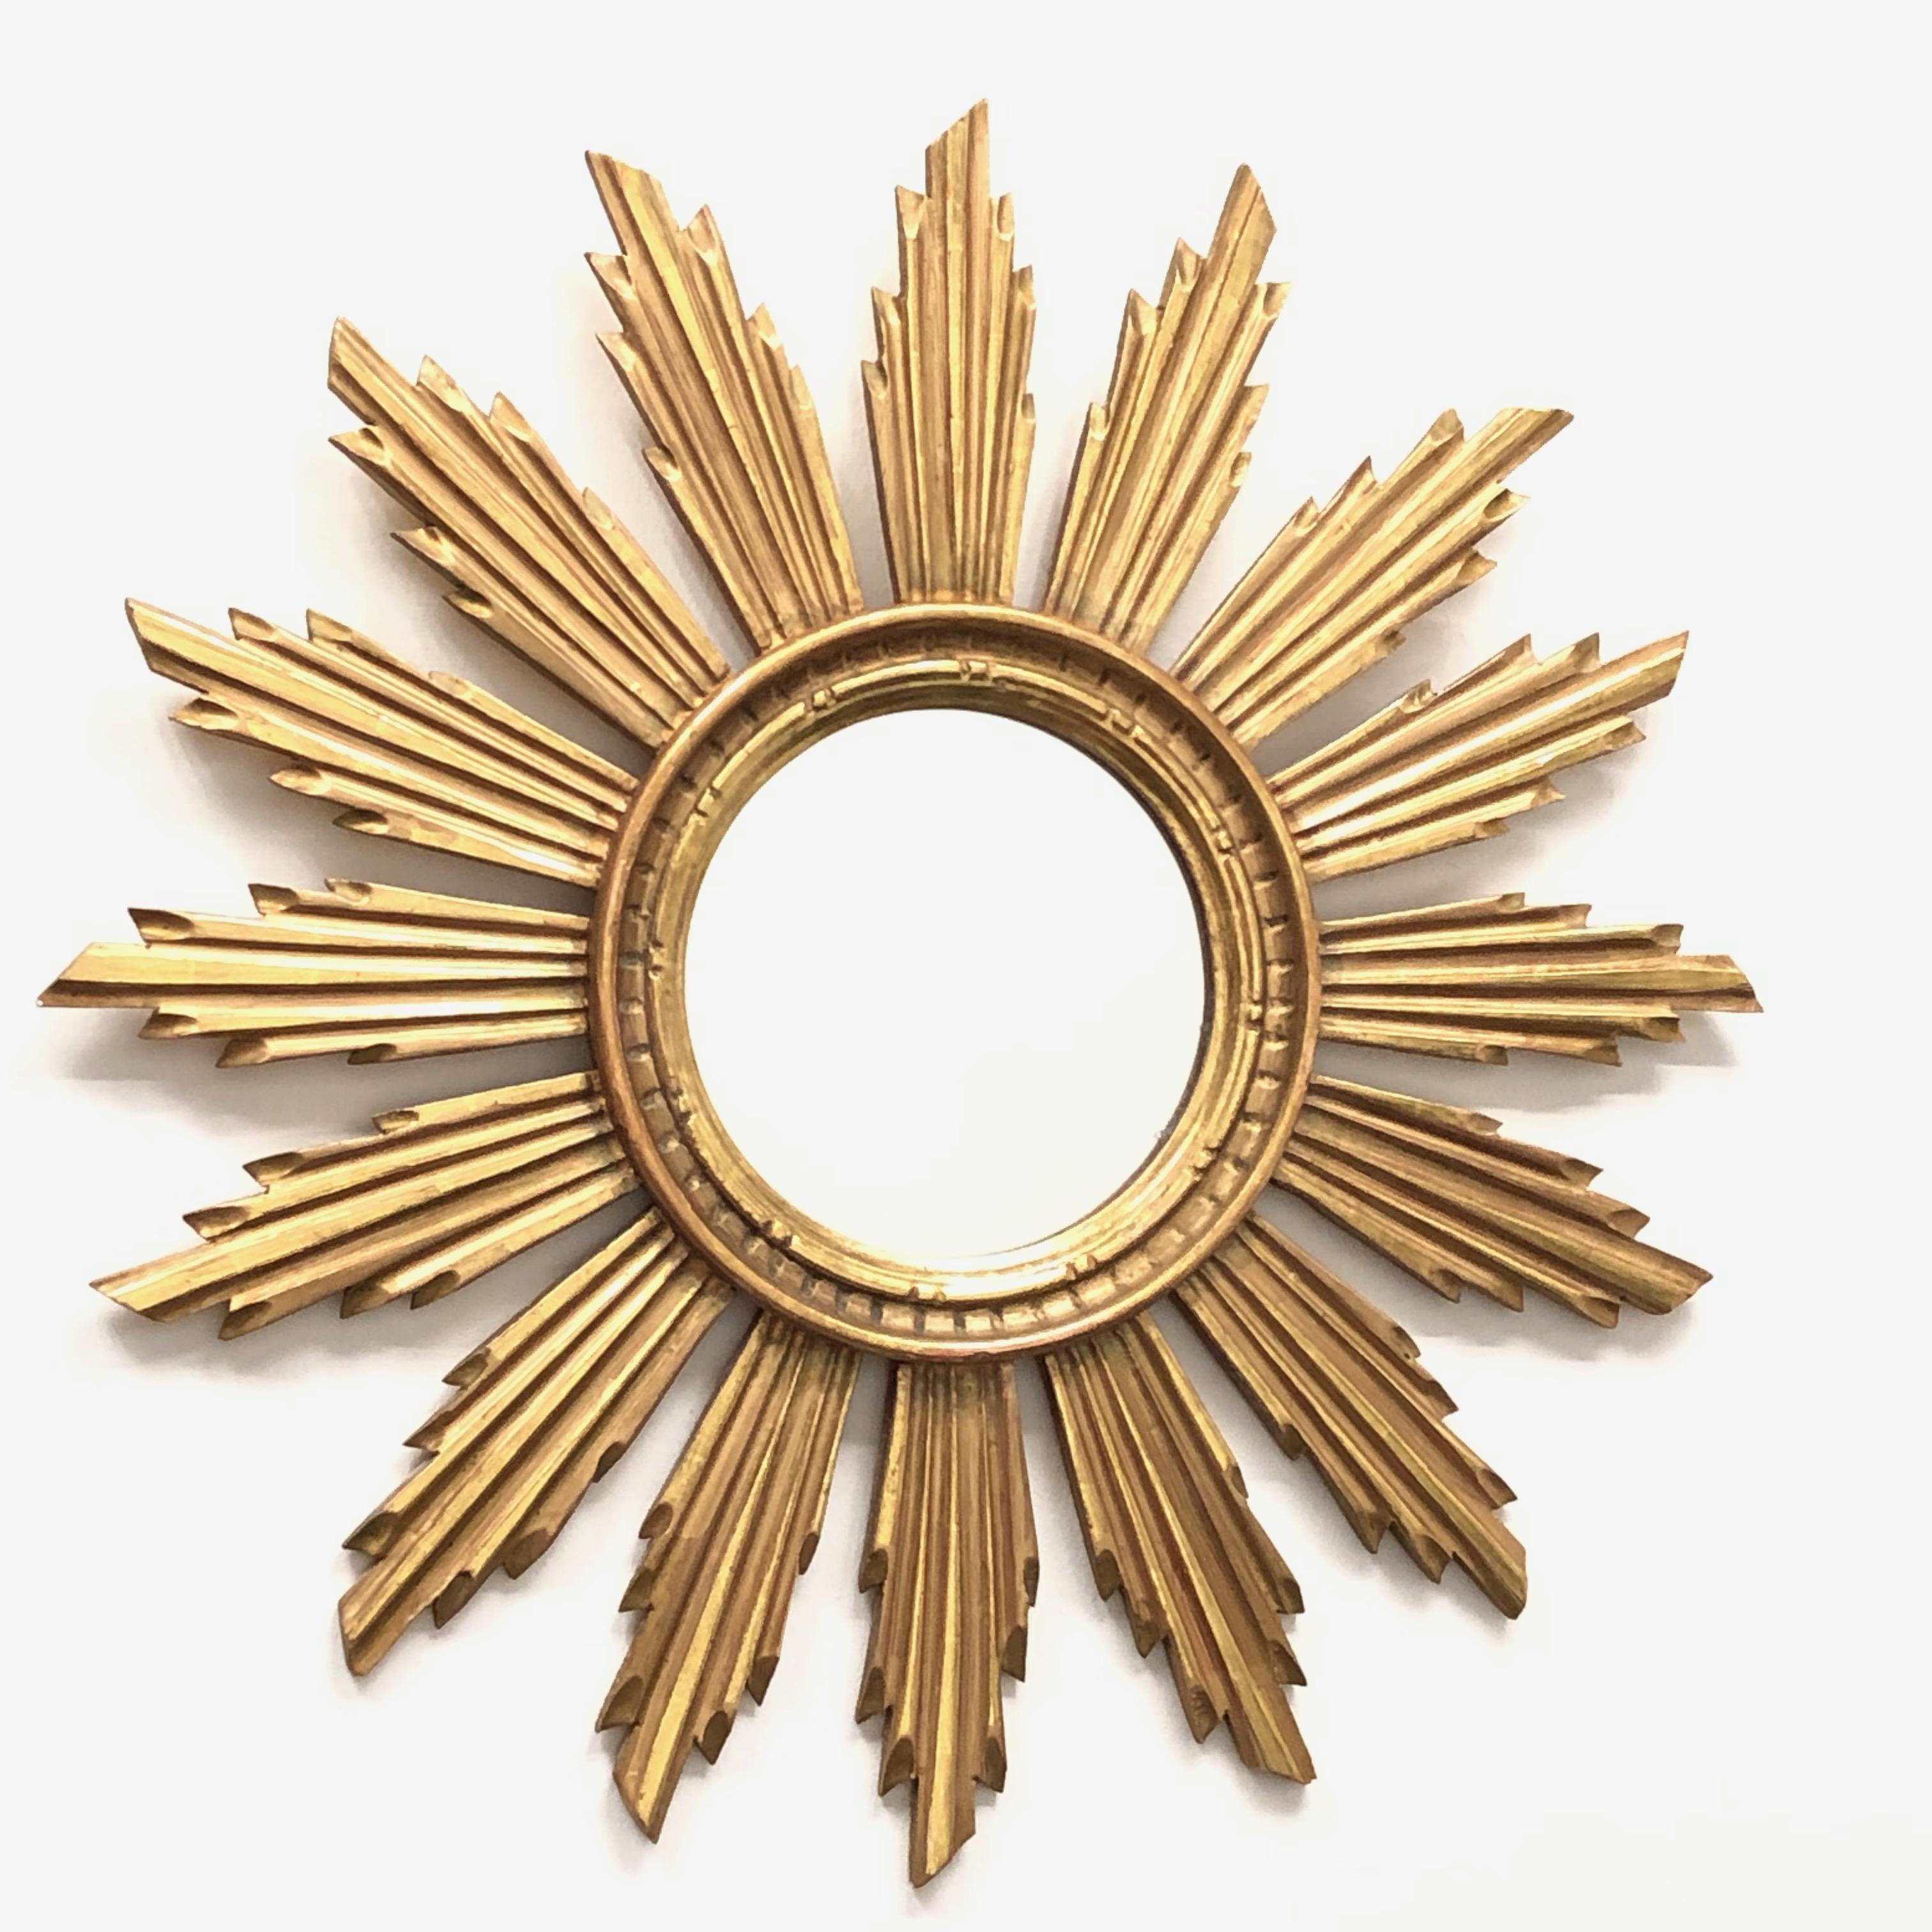 A gorgeous starburst mirror. Made of gilded wood. No chips, no cracks, no repairs. It measures approximate 22 1/4